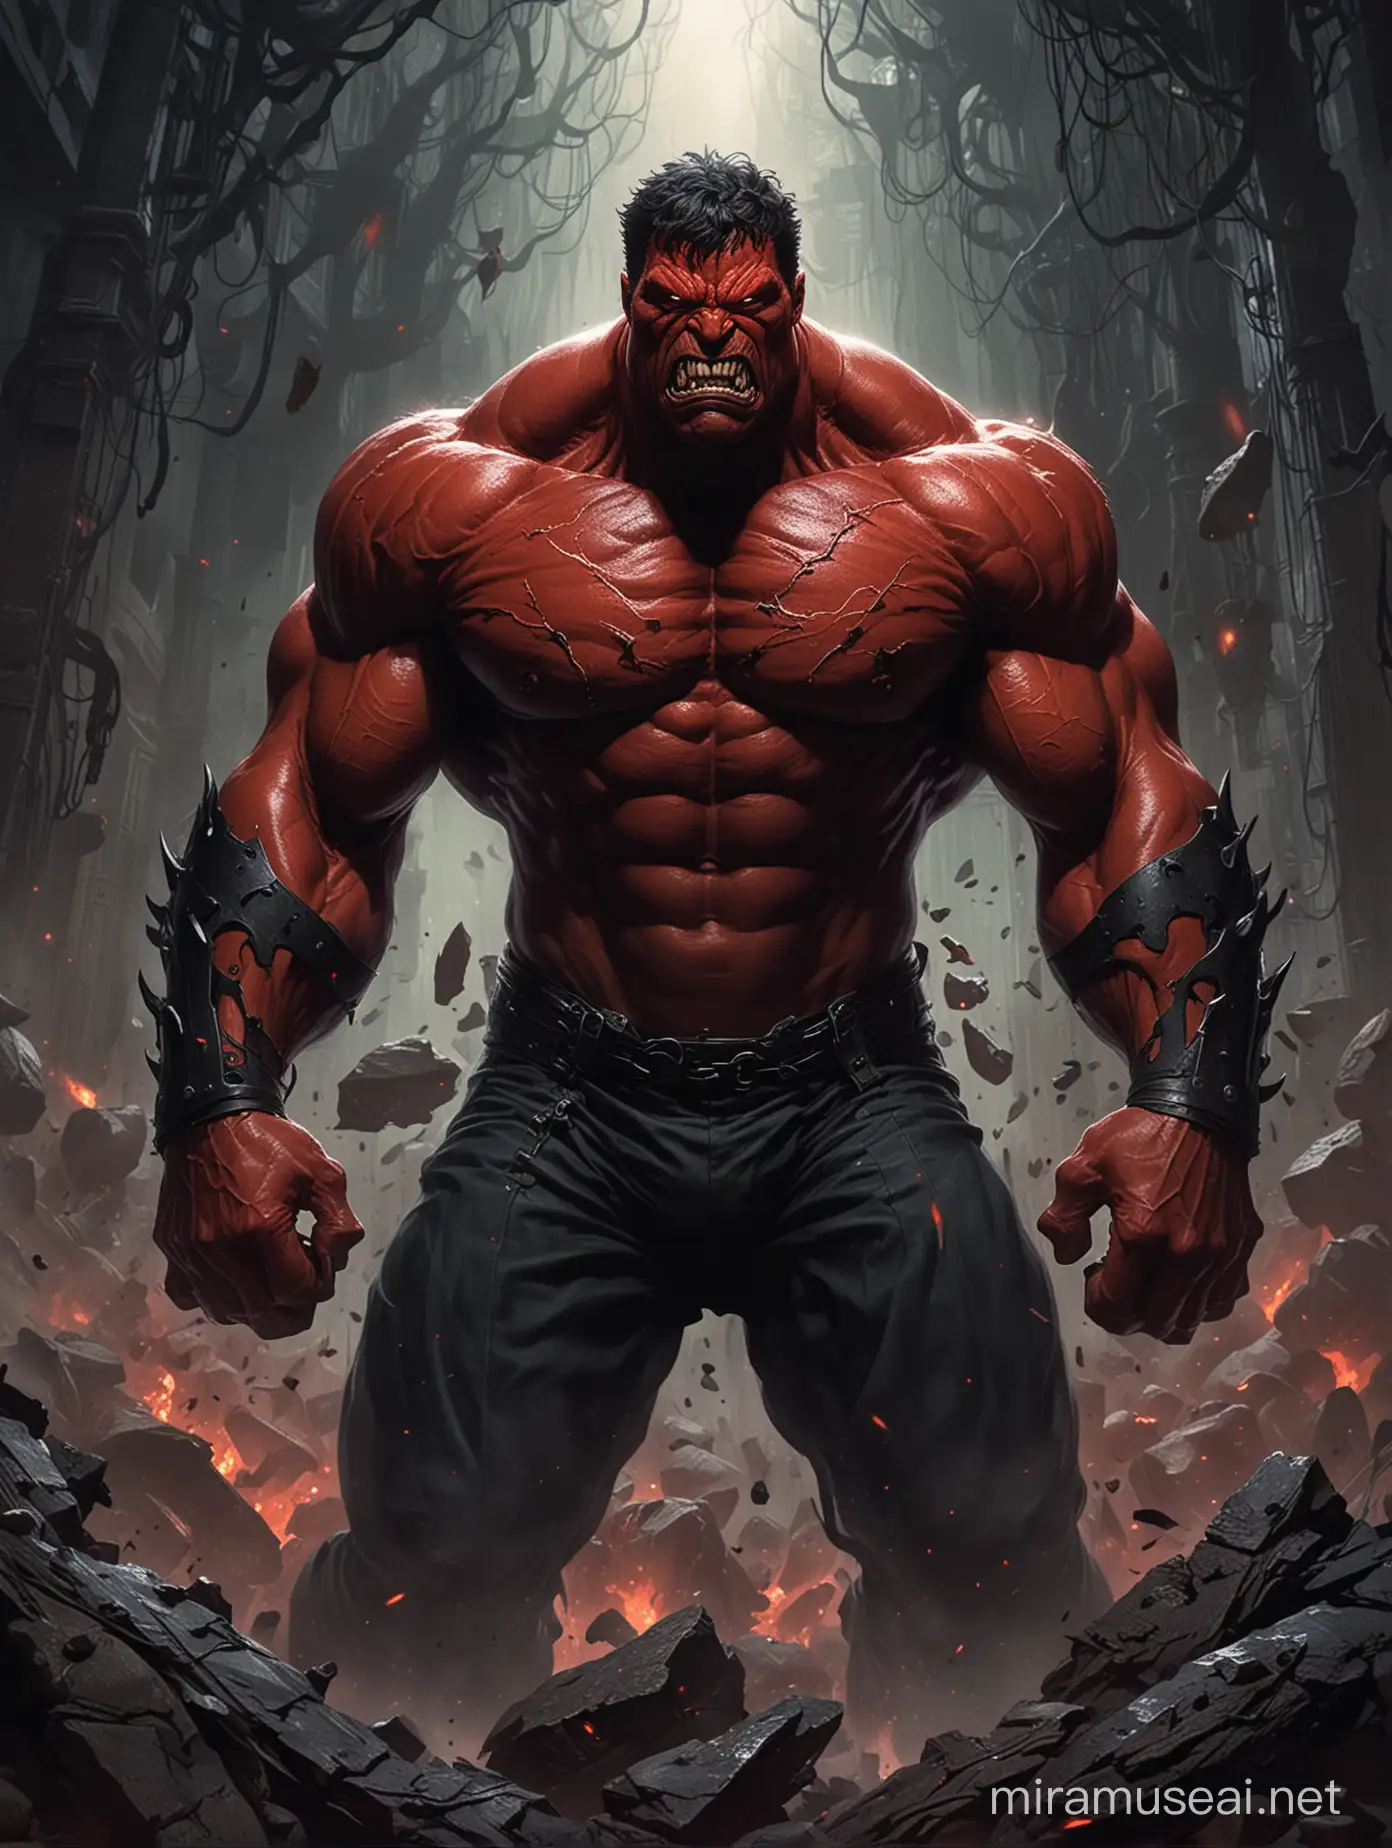 The Dark Lord Red Hulk Conqueror of Shadows and Master of the Abyss